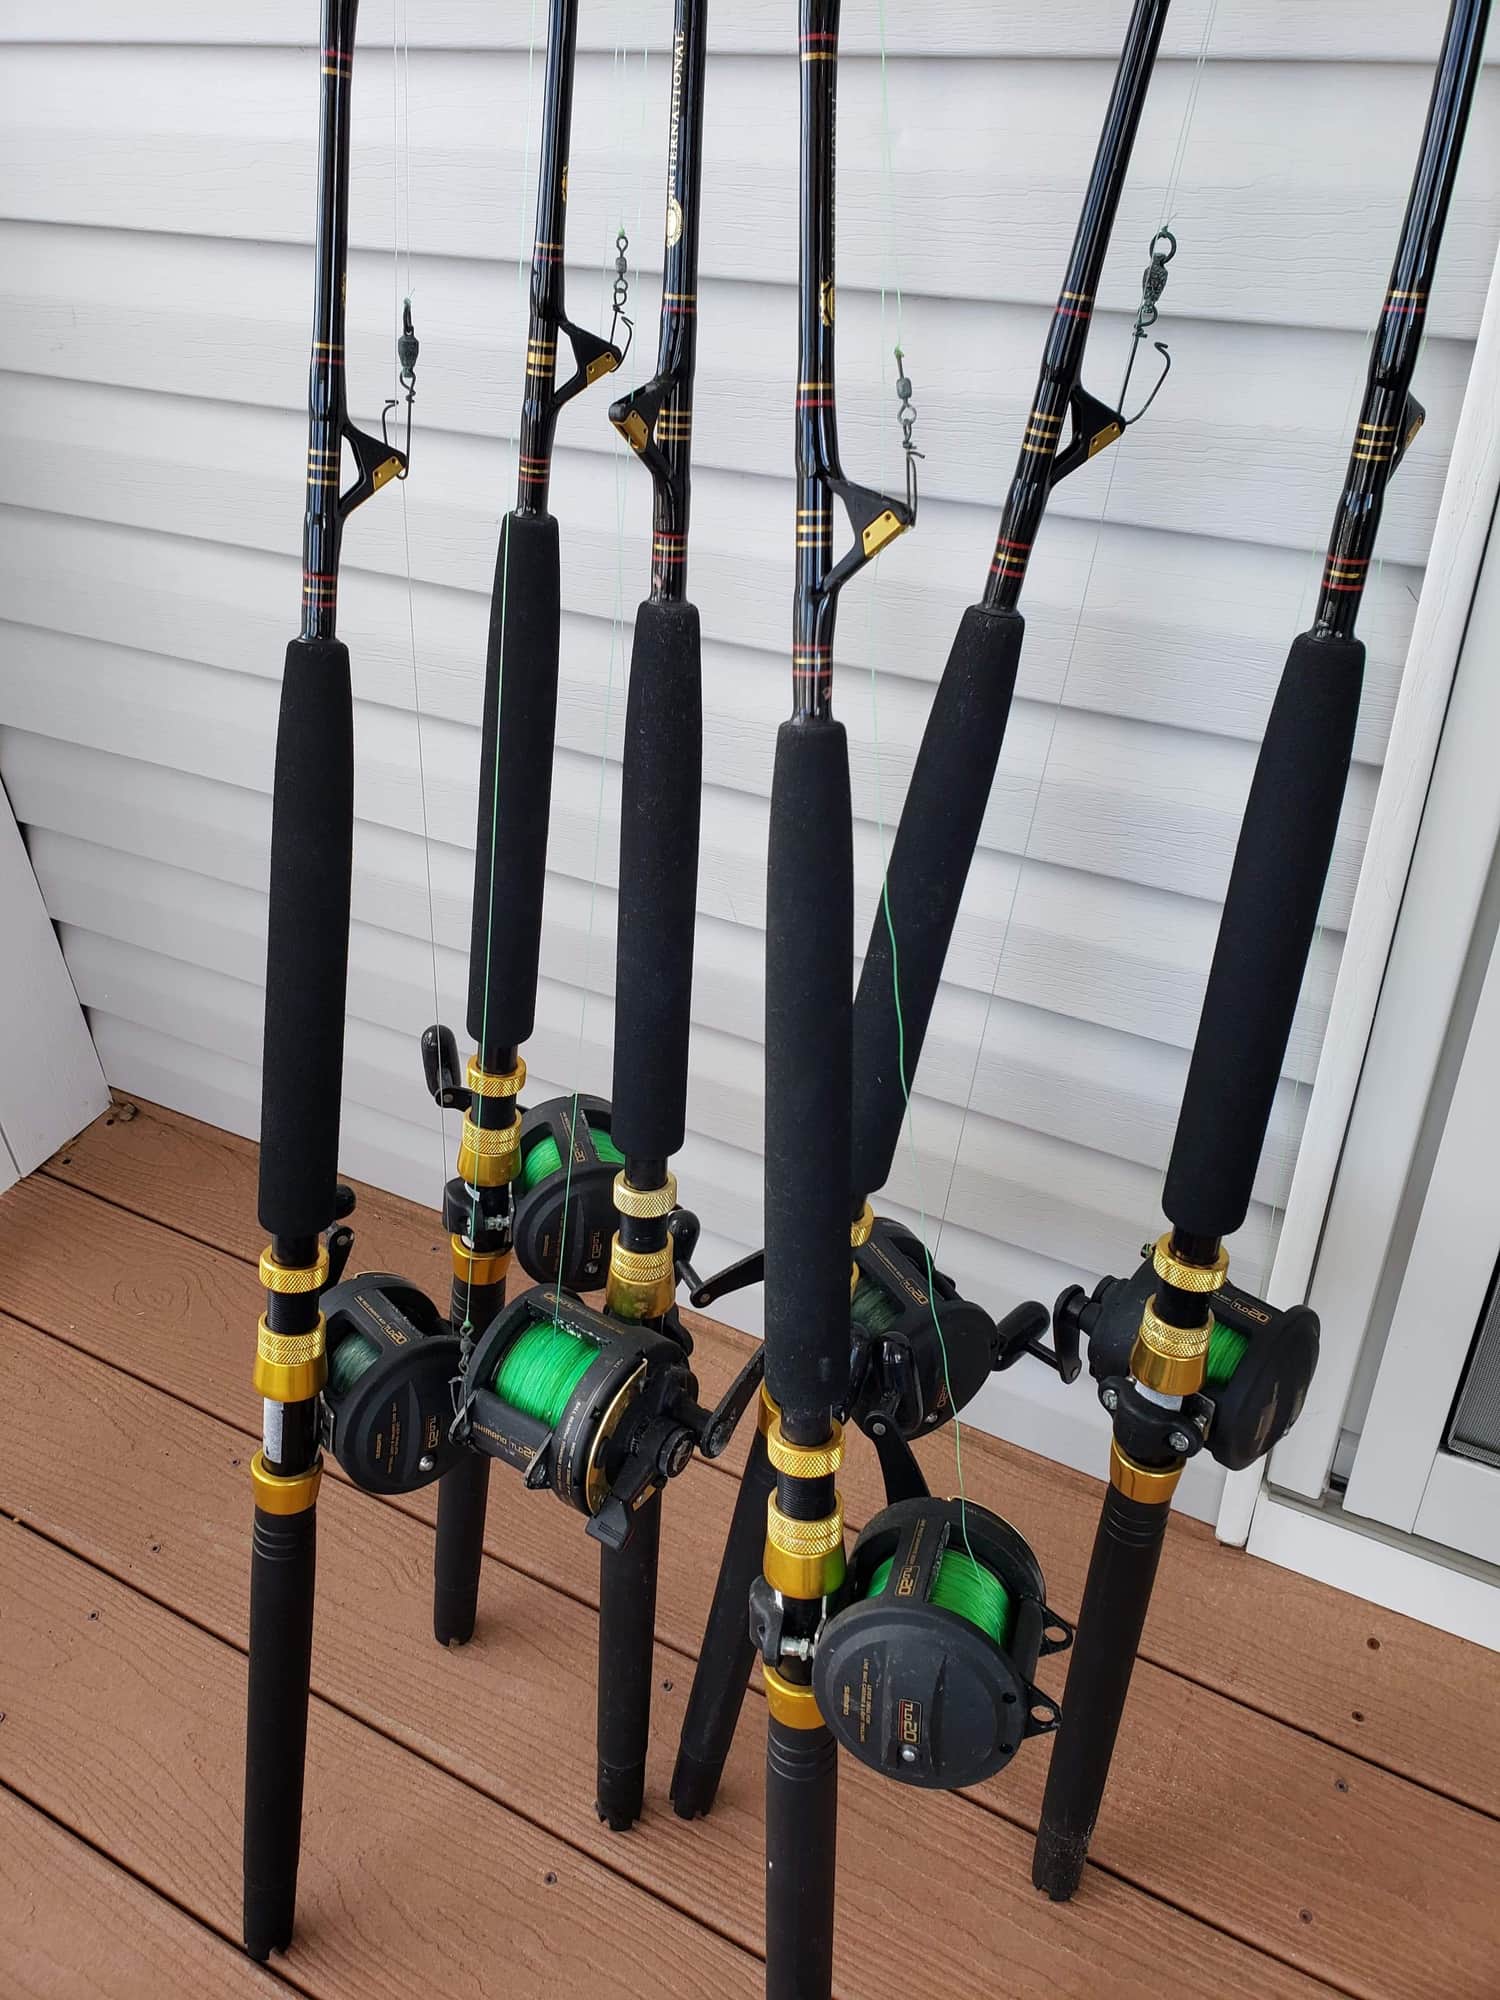 6x Shimano tld 20's on Penn international rods - The Hull Truth - Boating  and Fishing Forum